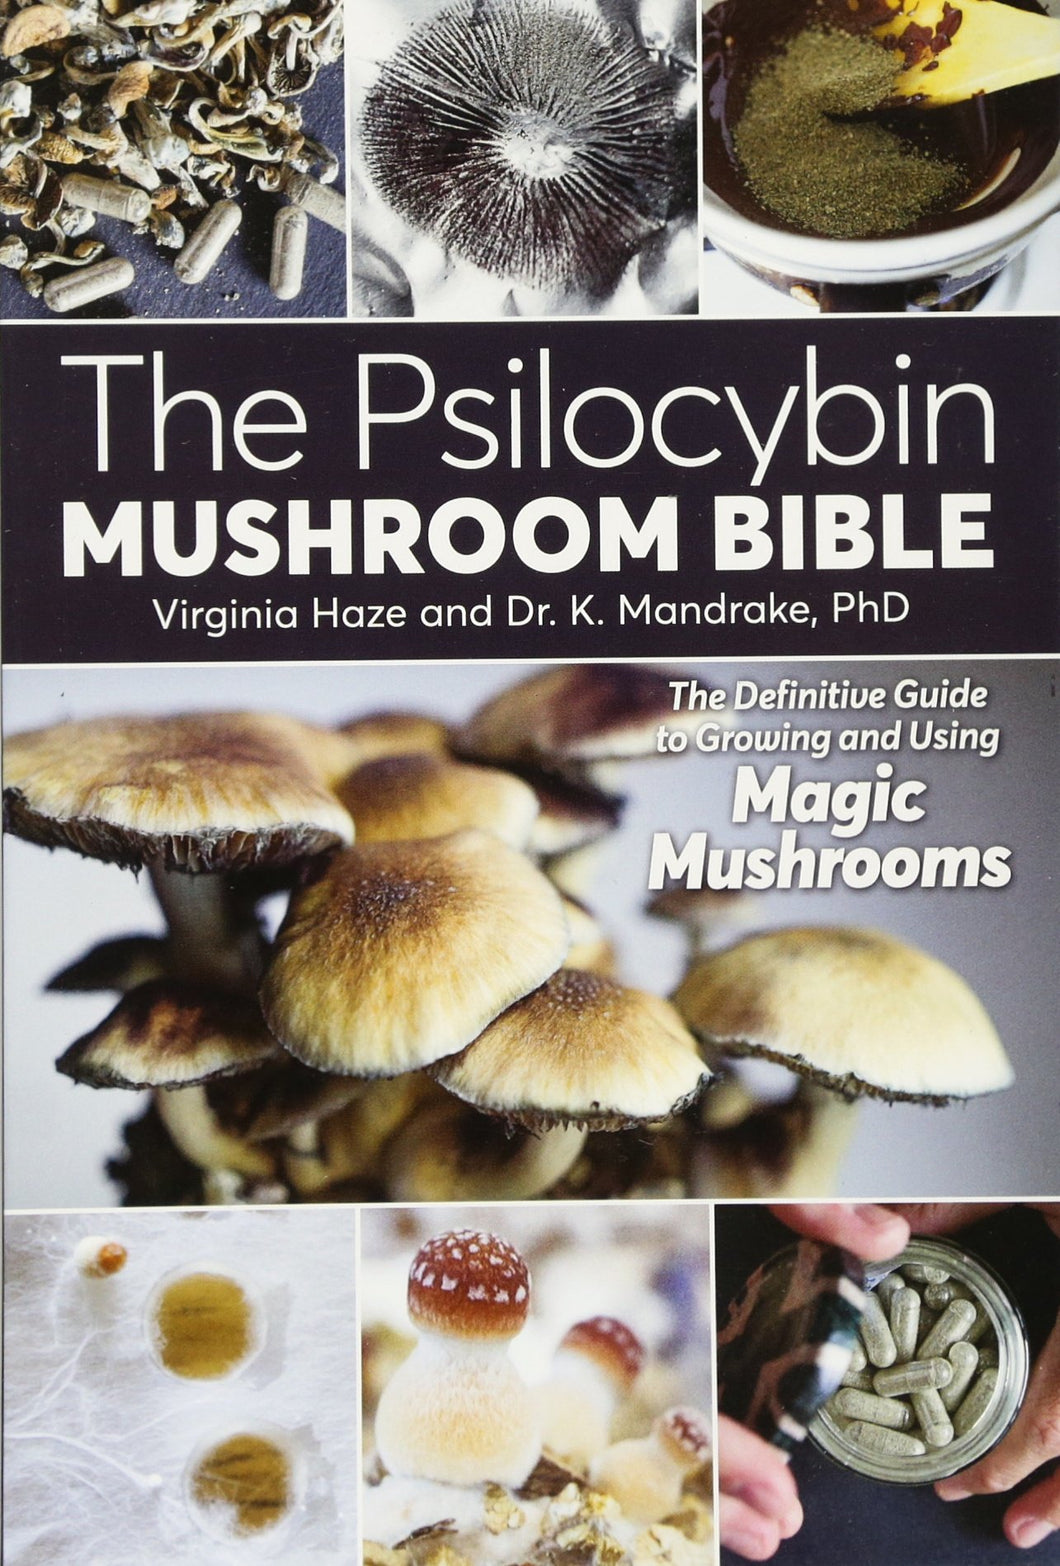 The Psilocybin Mushroom Bible: The Definitive Guide to Growing and Using Magic Mushrooms by by Dr. K. Mandrake, Virginia Haze